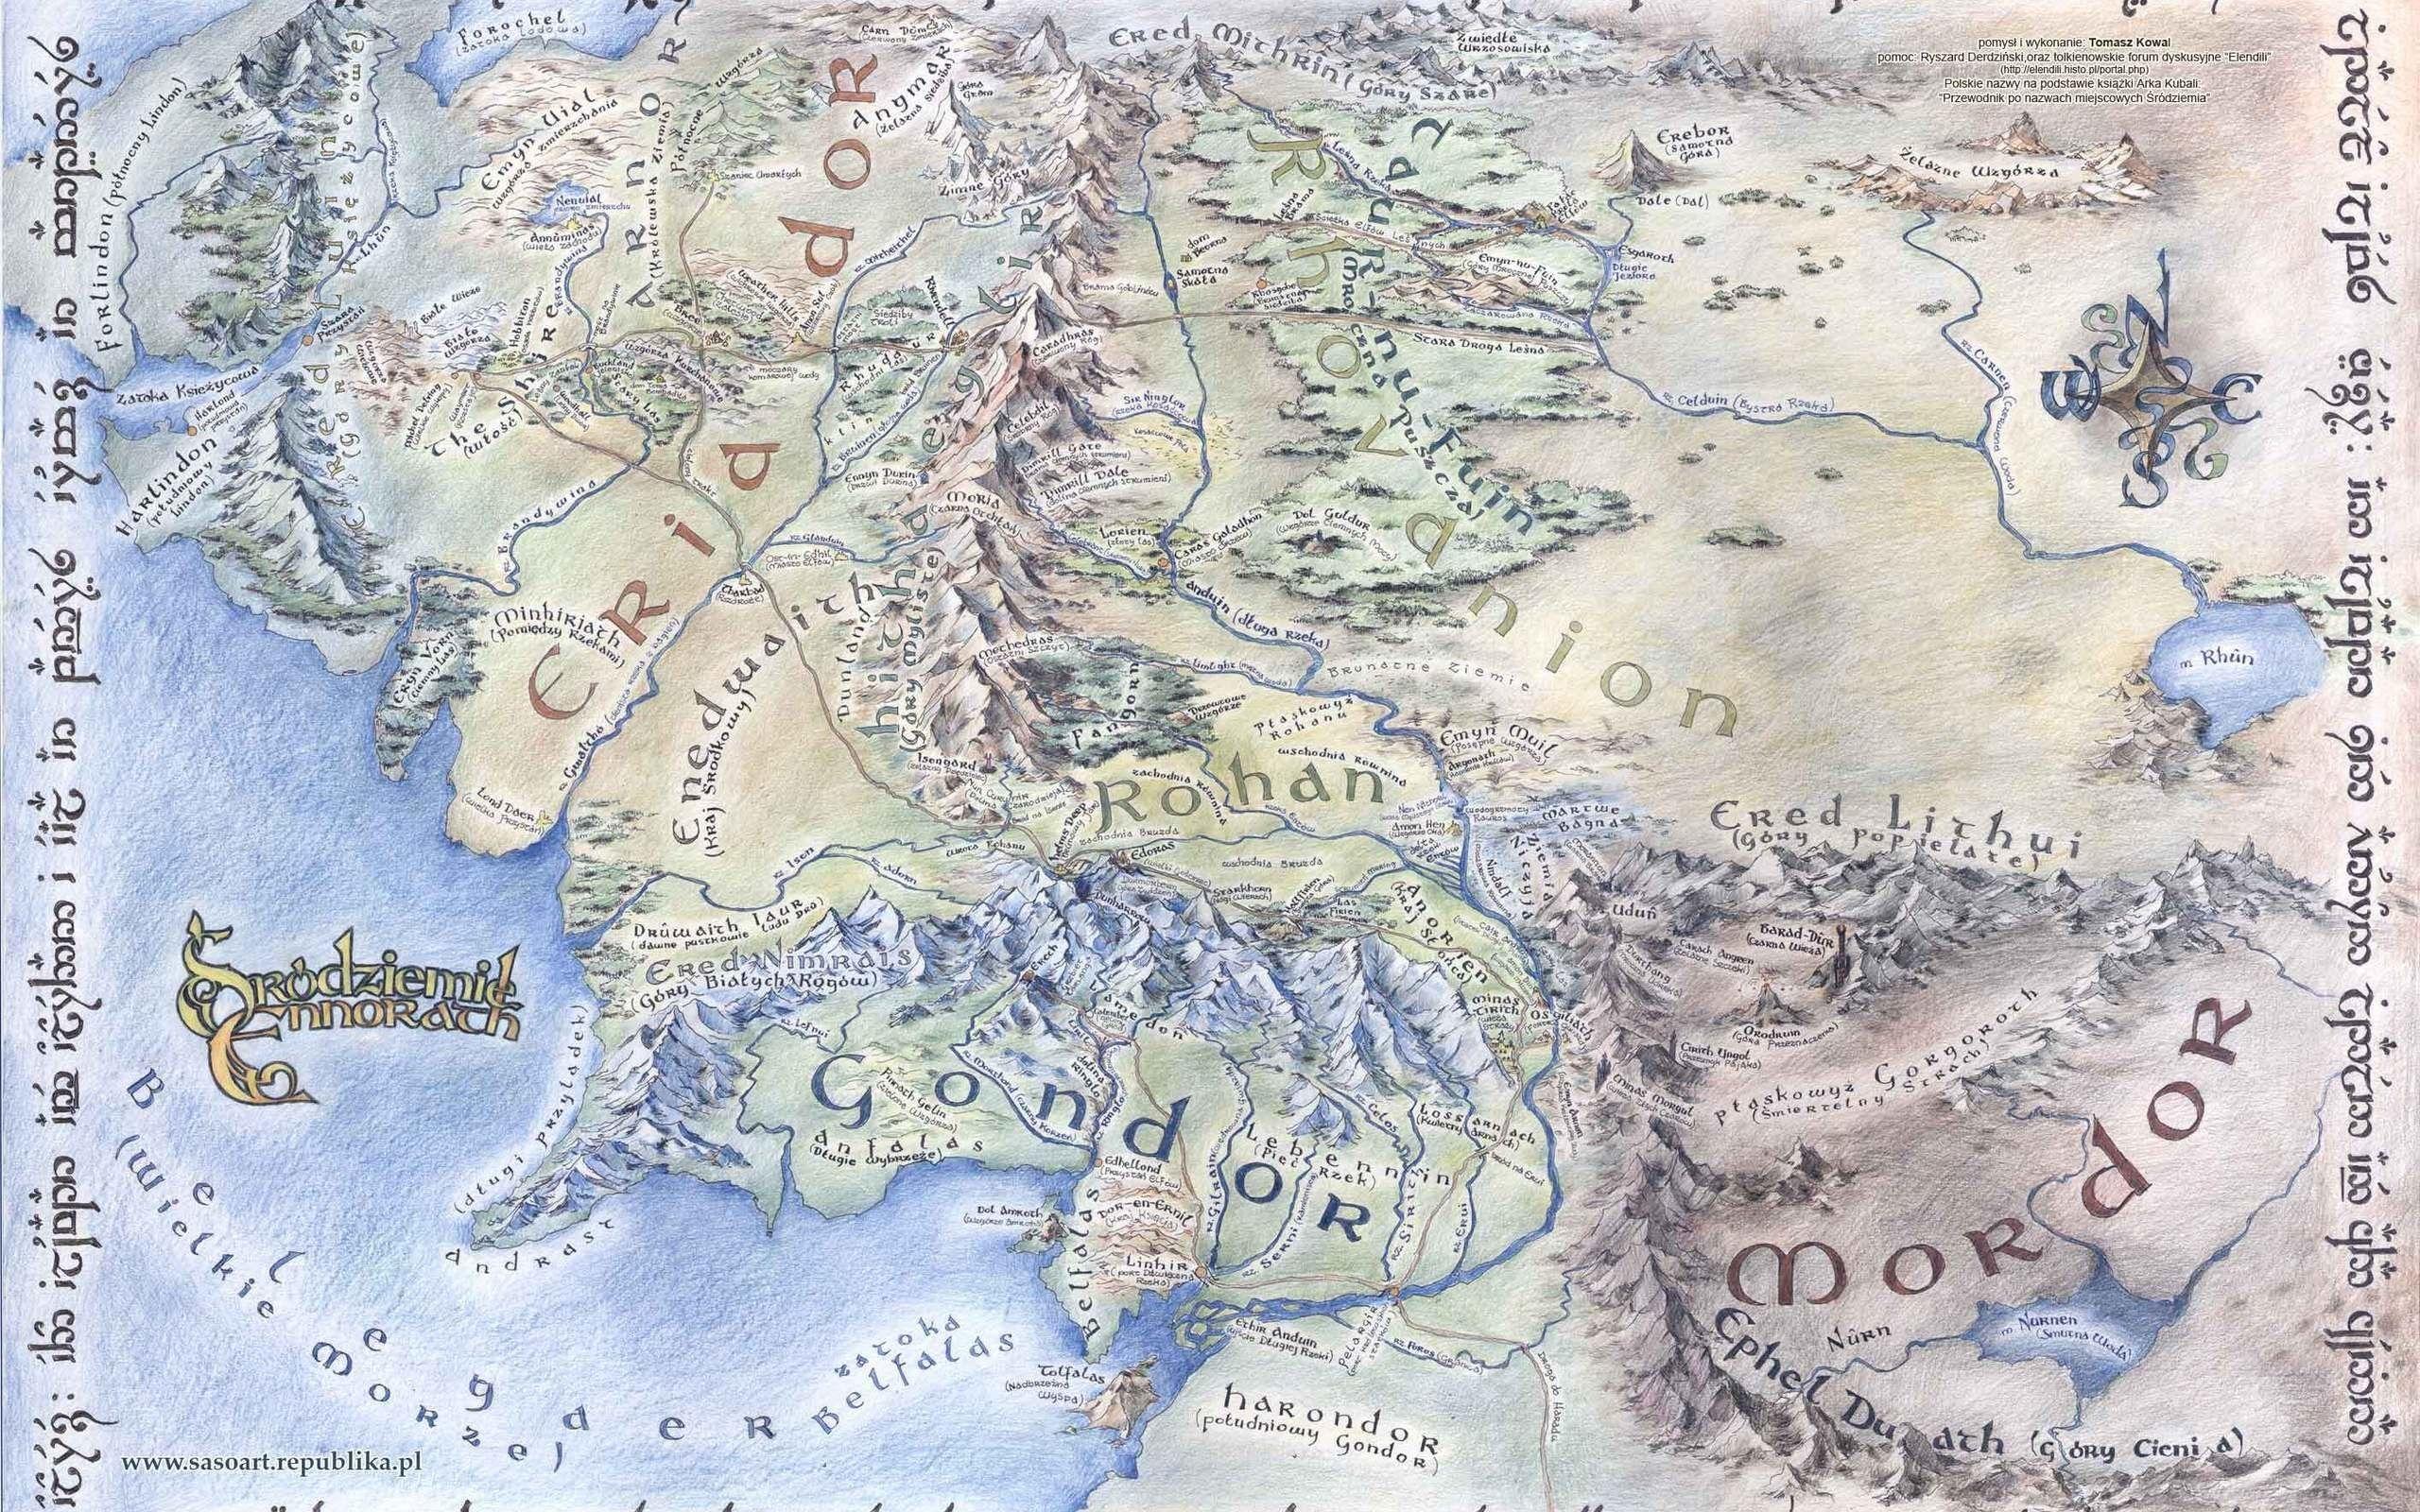 Game Of Thrones Map Wallpapers Wallpaper Cave